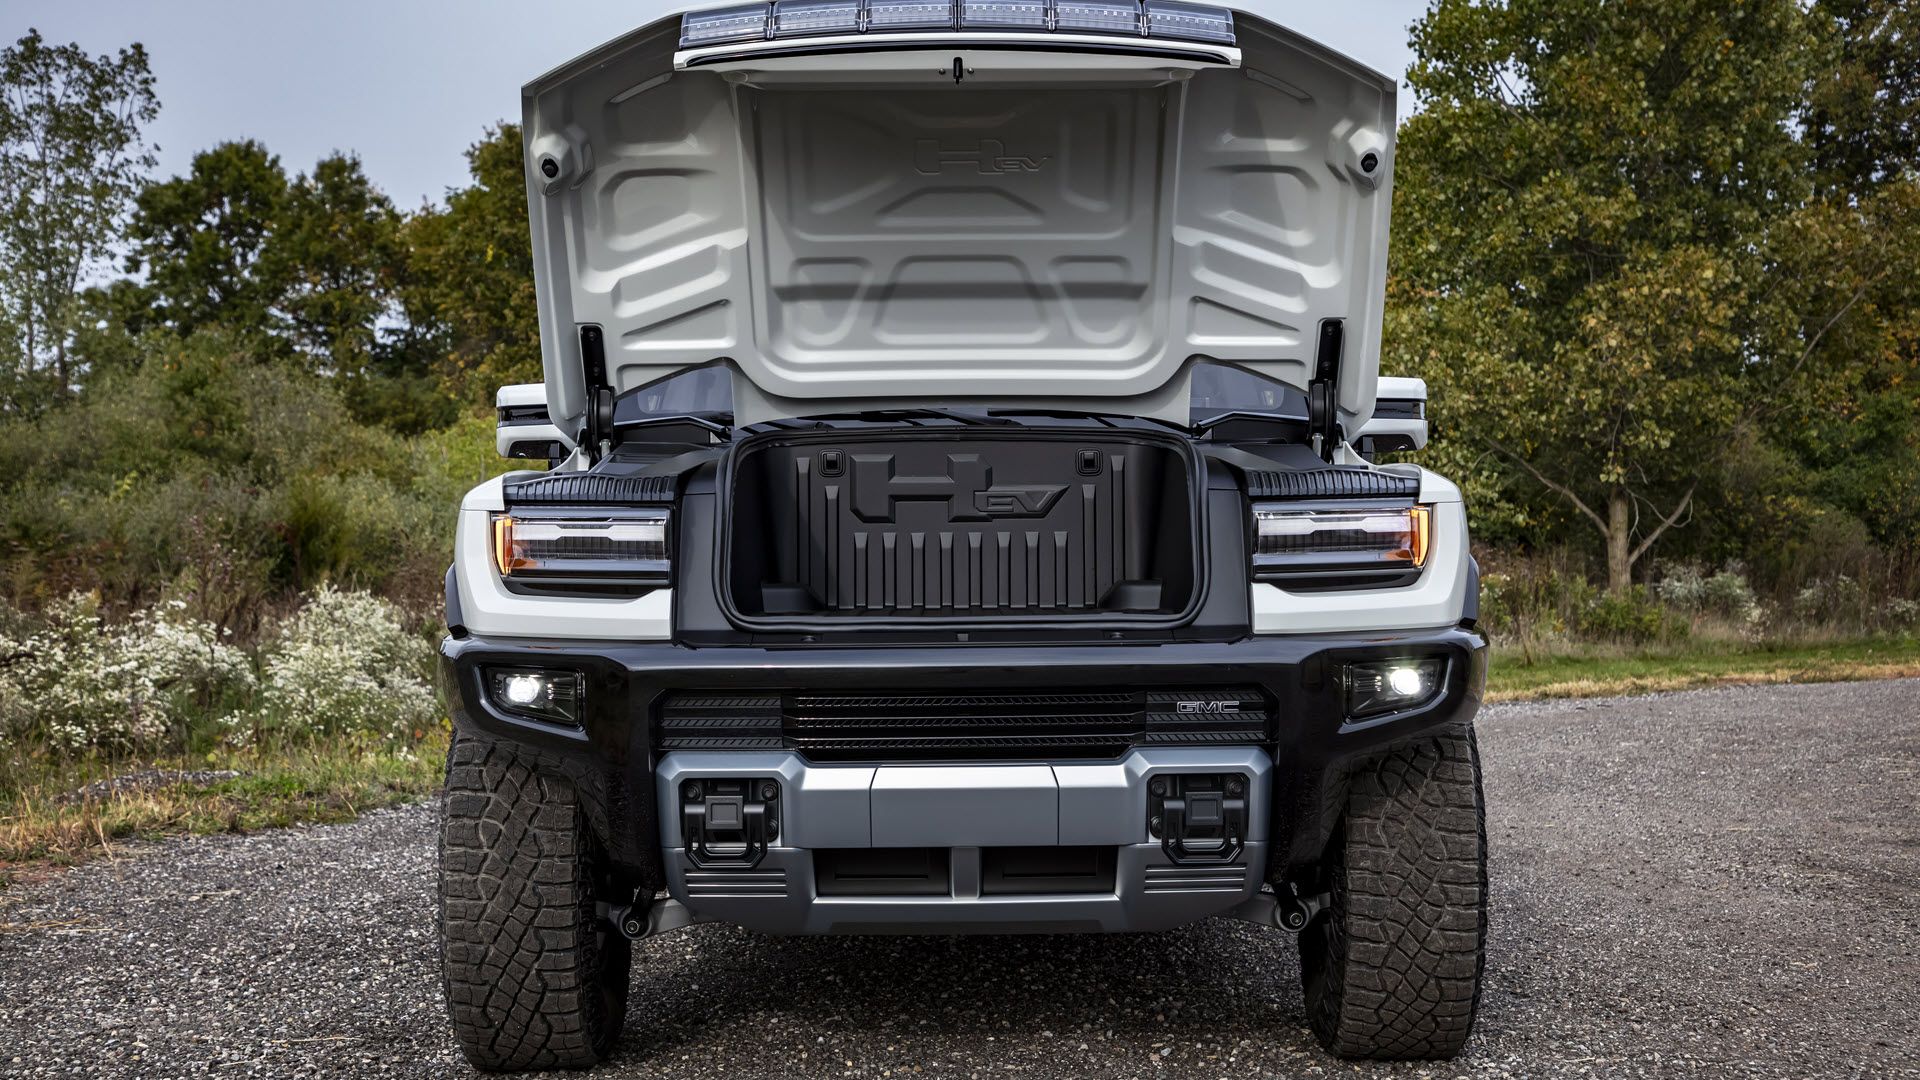 The front hood of the Hummer, opened to reveal a &quot;frunk.&quot;